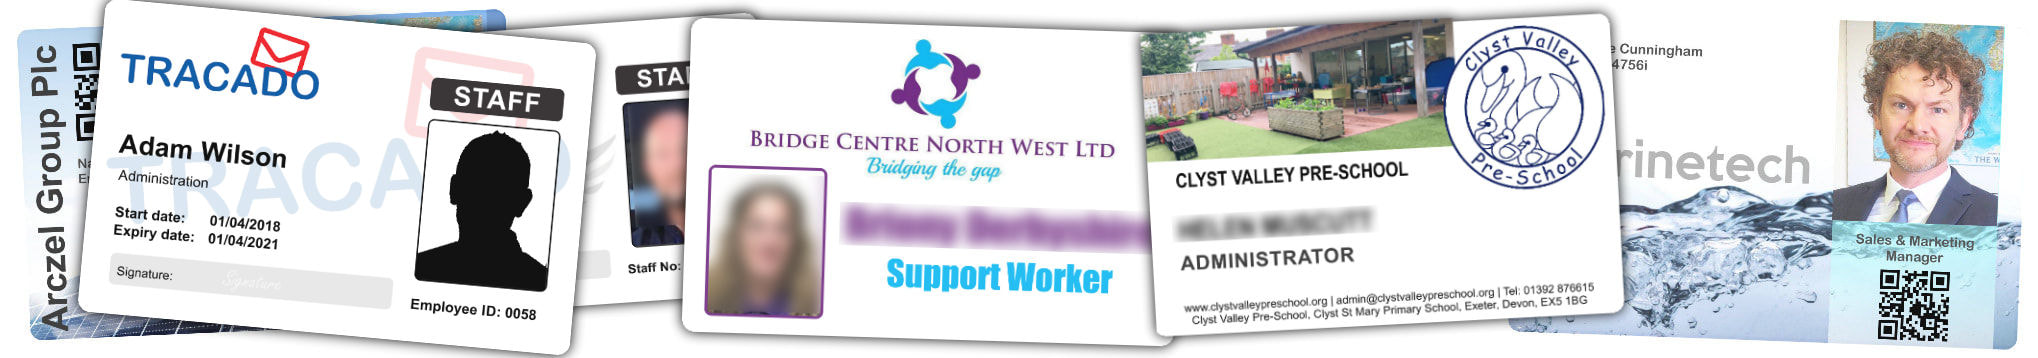 Middlesbrough examples of staff photo ID cards | samples of employee Identity card printing | Workers ID cards printed in 